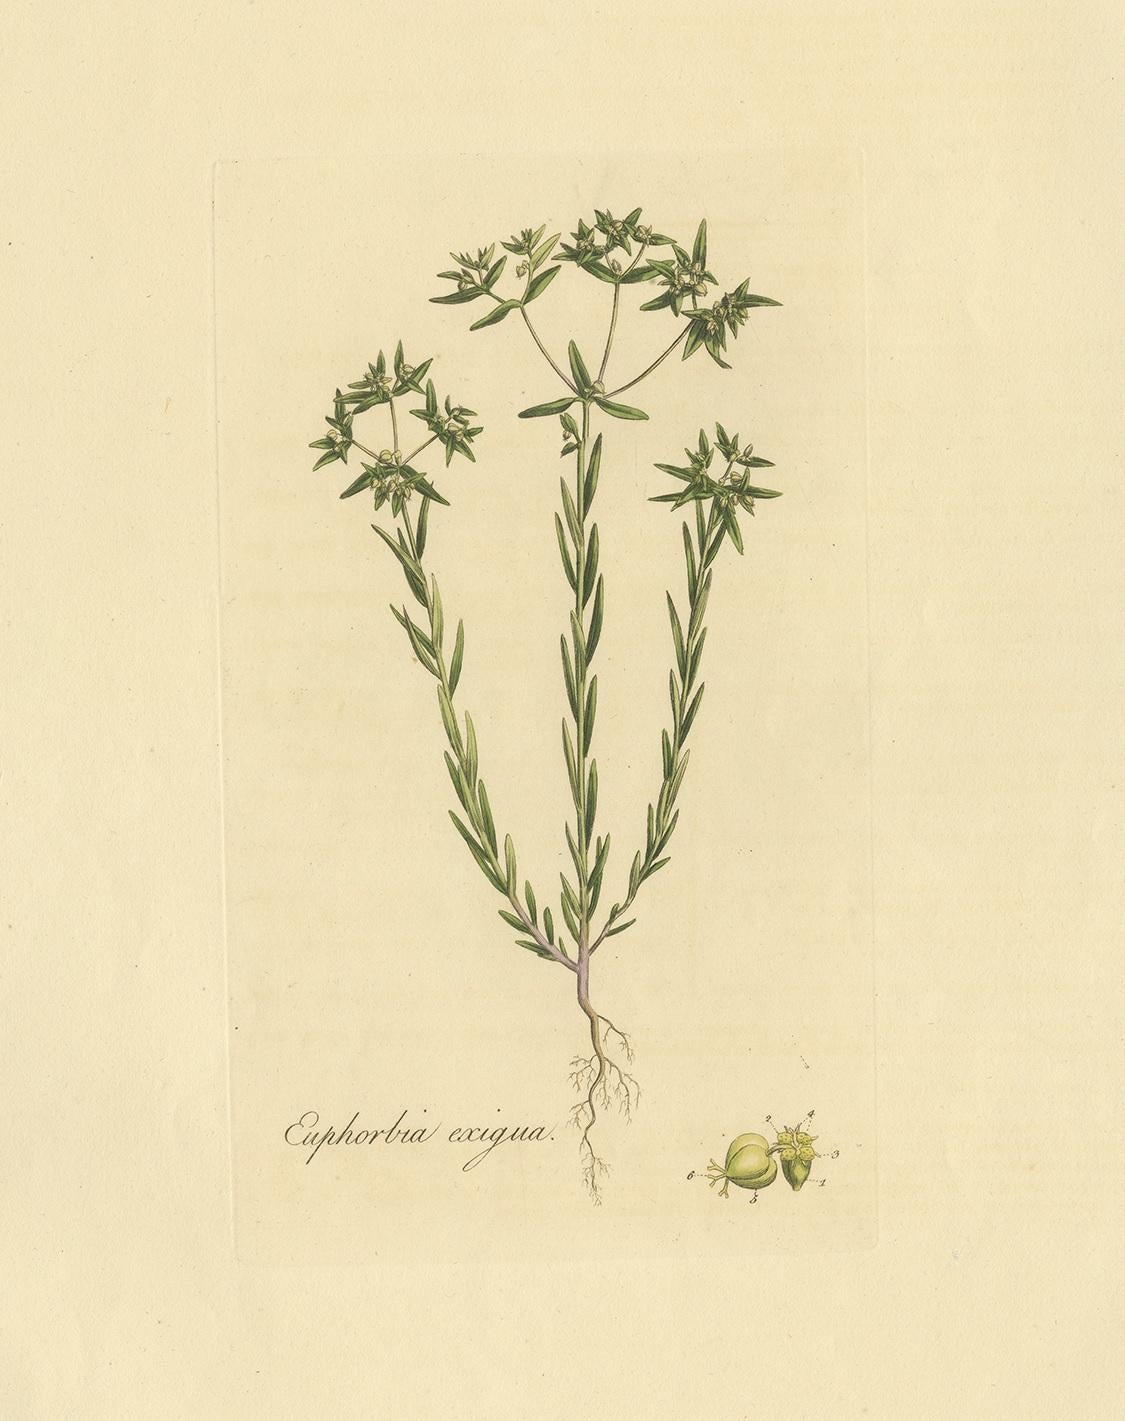 Antique botany print titled 'Euphorbia Exigua'. Hand colored engraving of euphorbia exigua, also known as dwarf spurge or small spurge. This print originates from 'Flora Londinensis' by William Curtis.